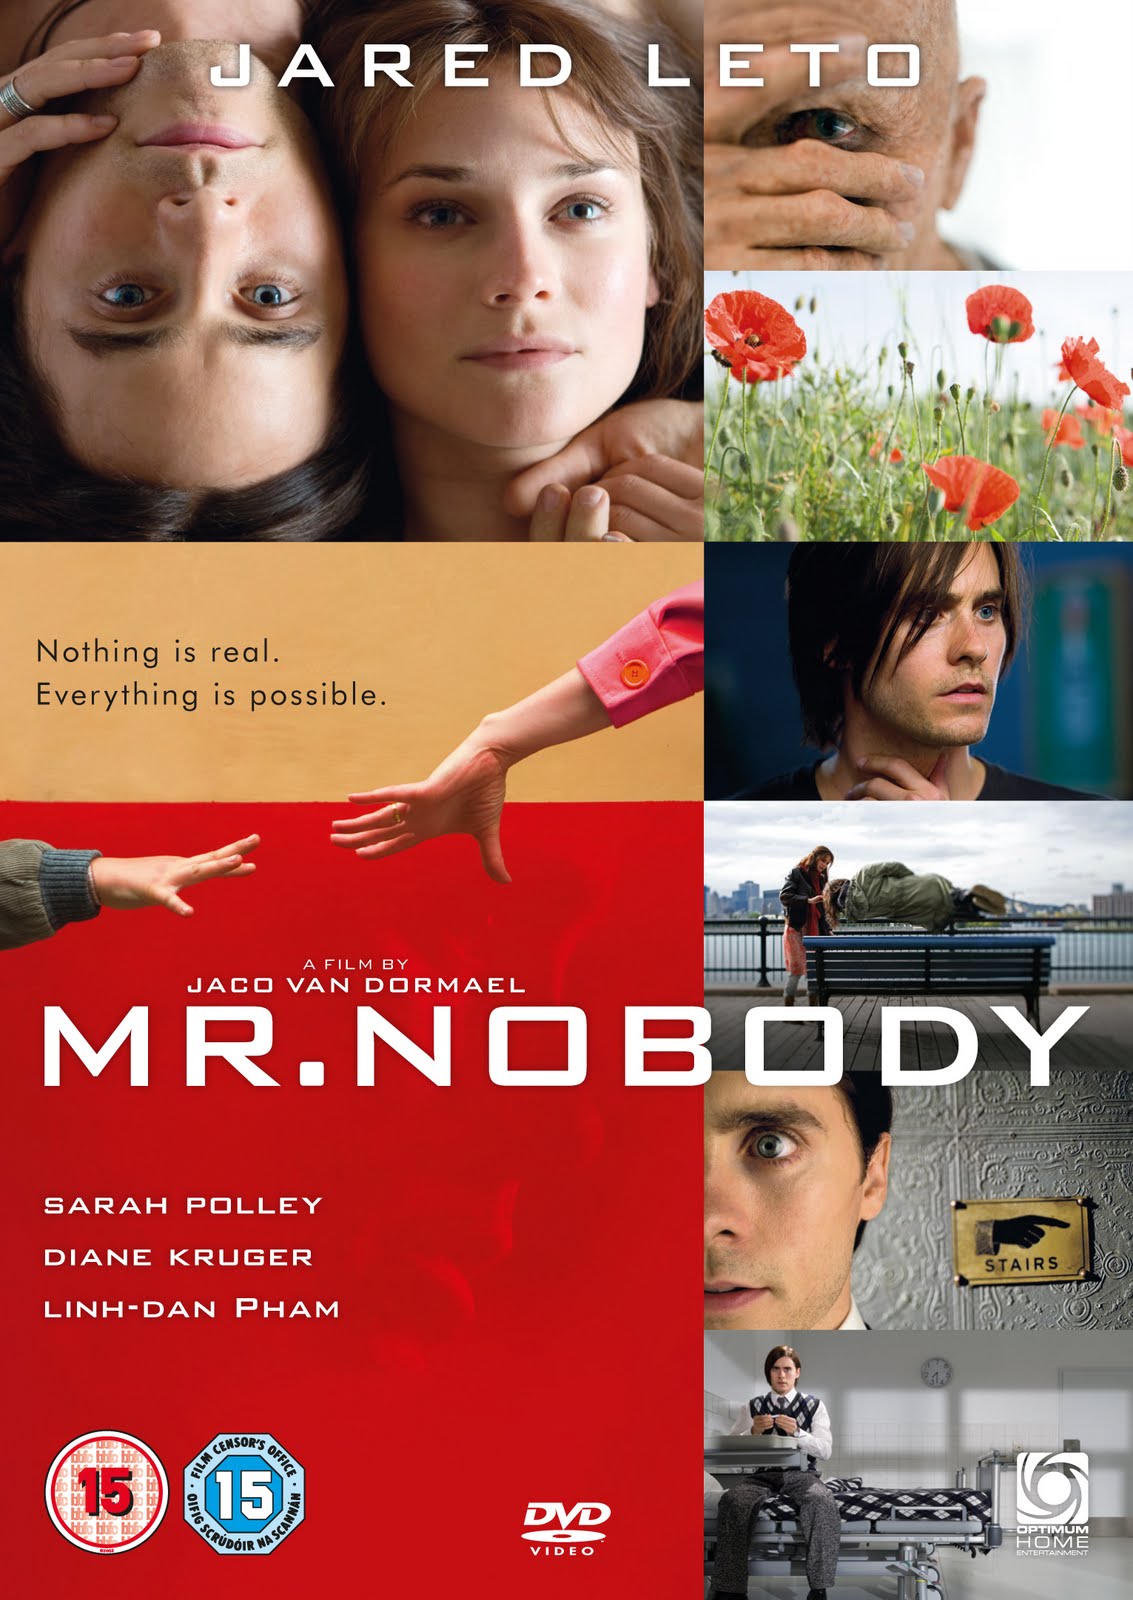 27 Top Images Mr Nobody Movie Poster : Mr Nobody 2009 Go Autographs